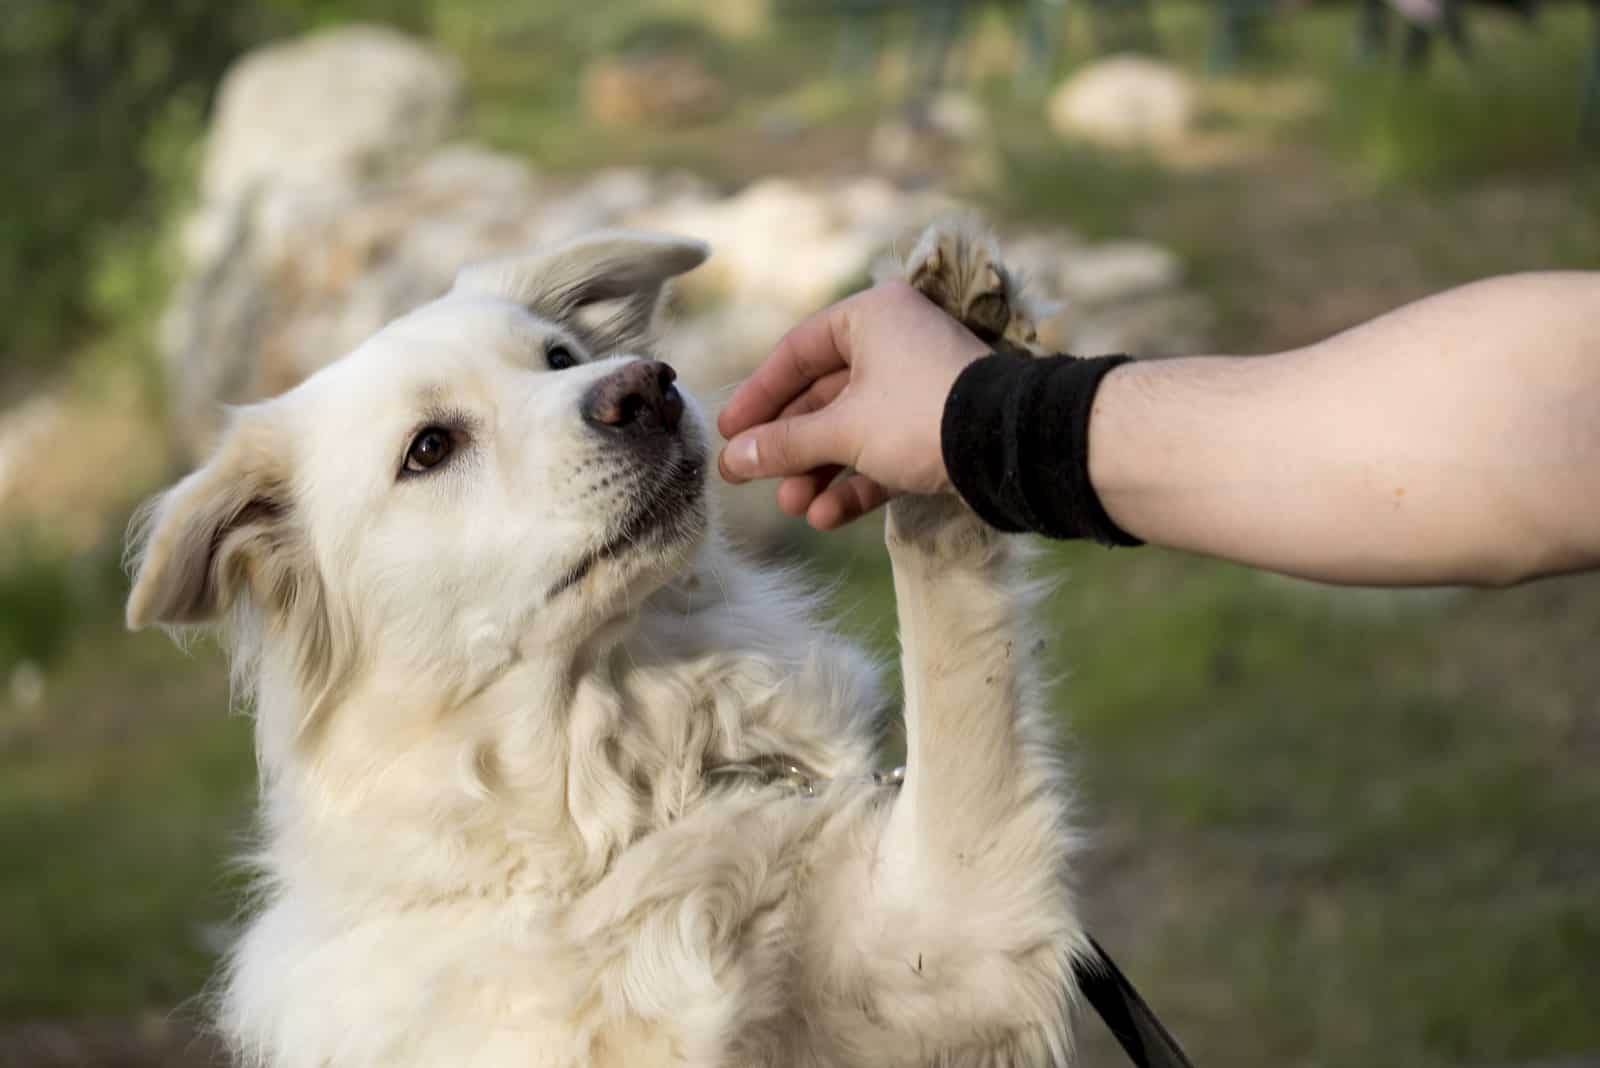 the dog eats a snack from the person's hand